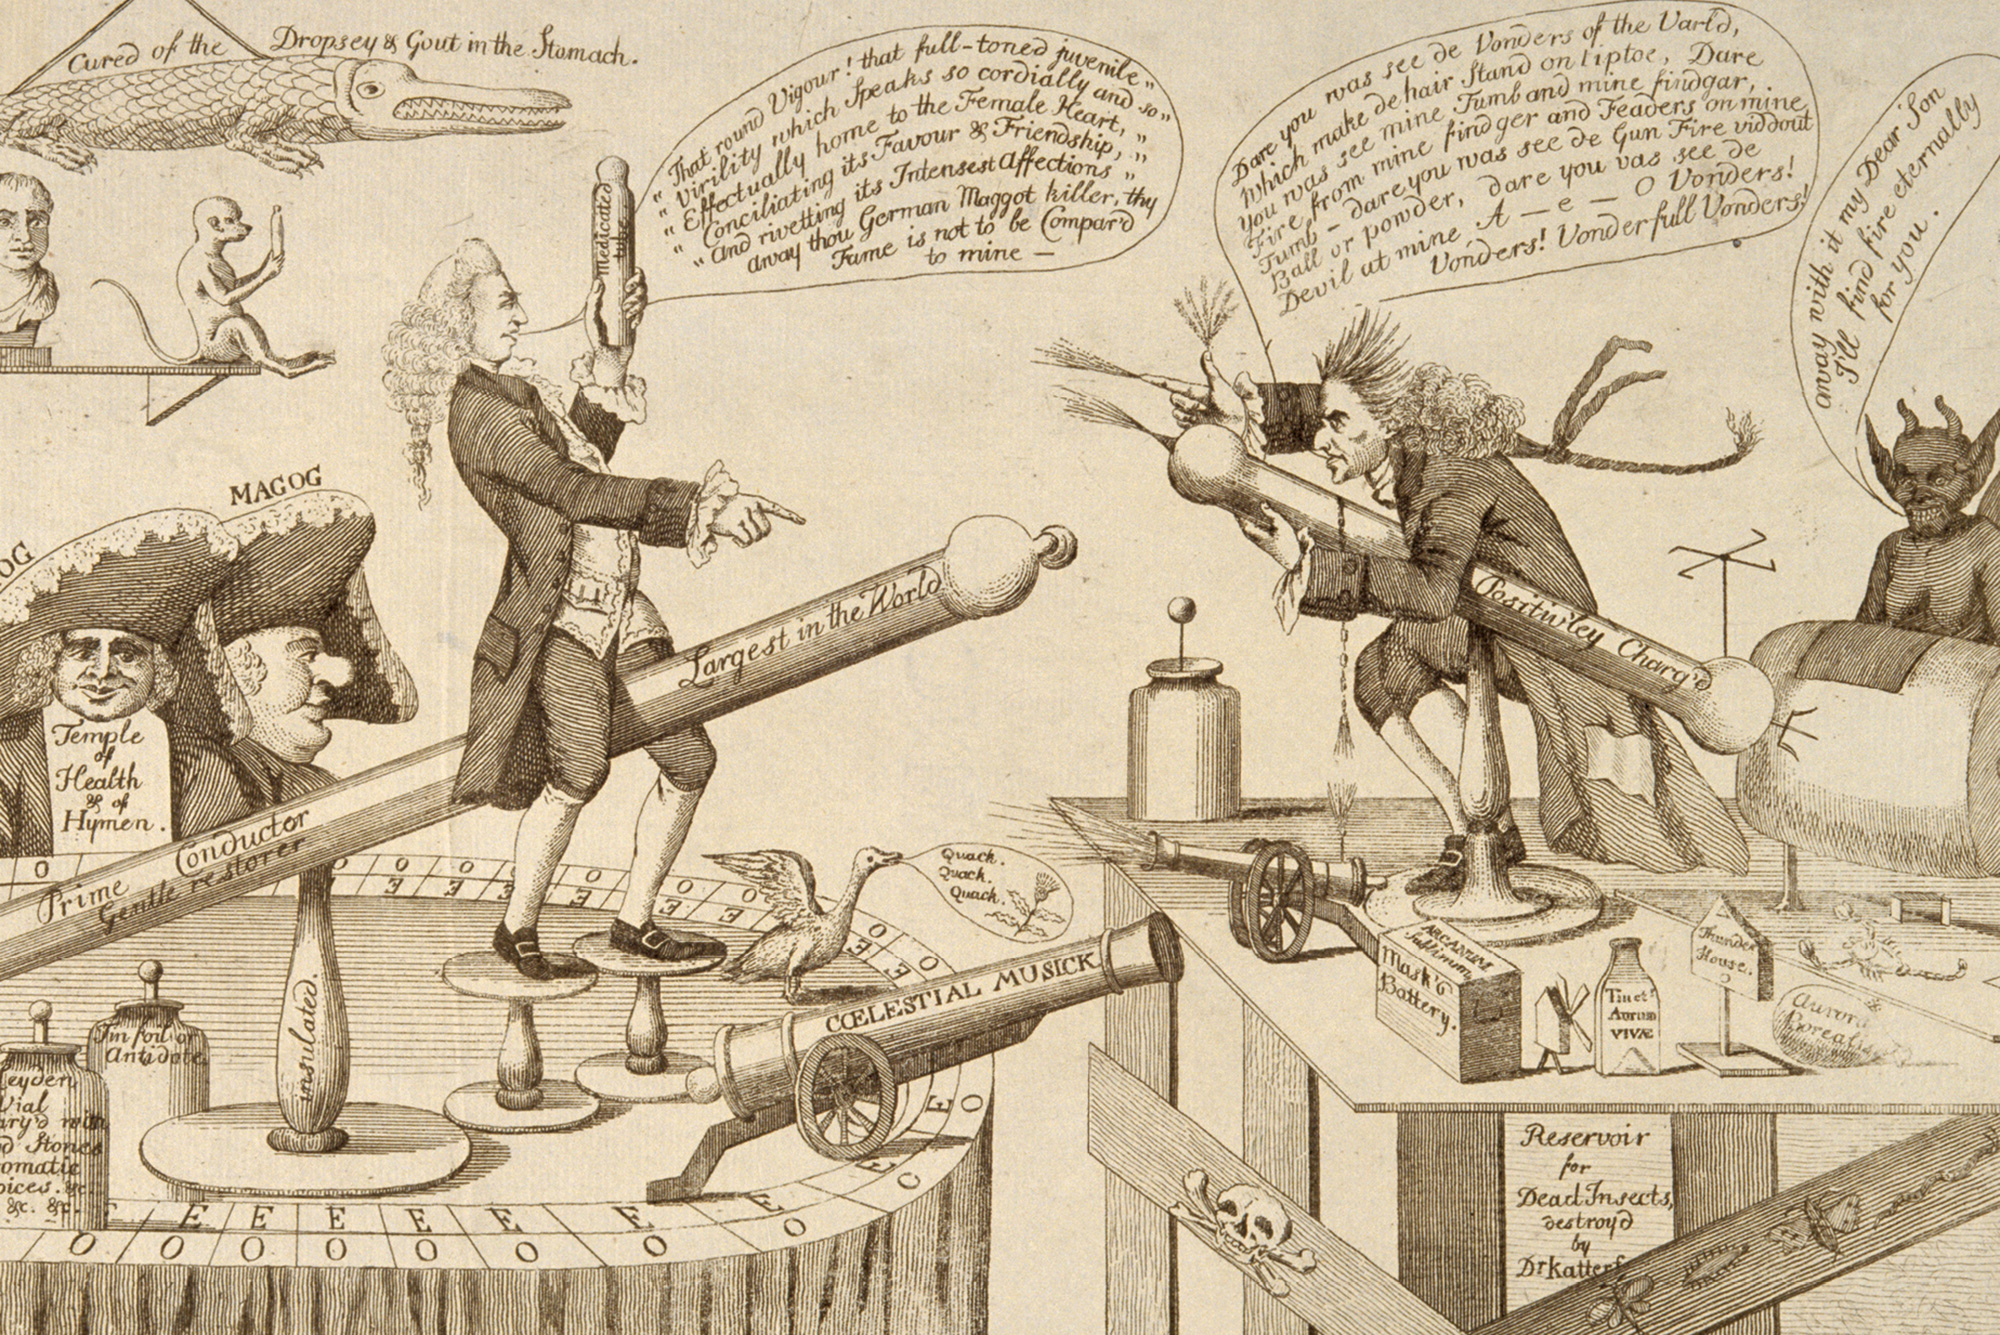 A seventeen eighty-three etching depicting a battle between James Graham and Gustavus Katterfelto, an itinerant Prussian conjurer and medical charlatan who lived in England during the last quarter of the eighteenth century. As the squawking duck at their feet suggests, the men were among the most infamous quacks of their day. 